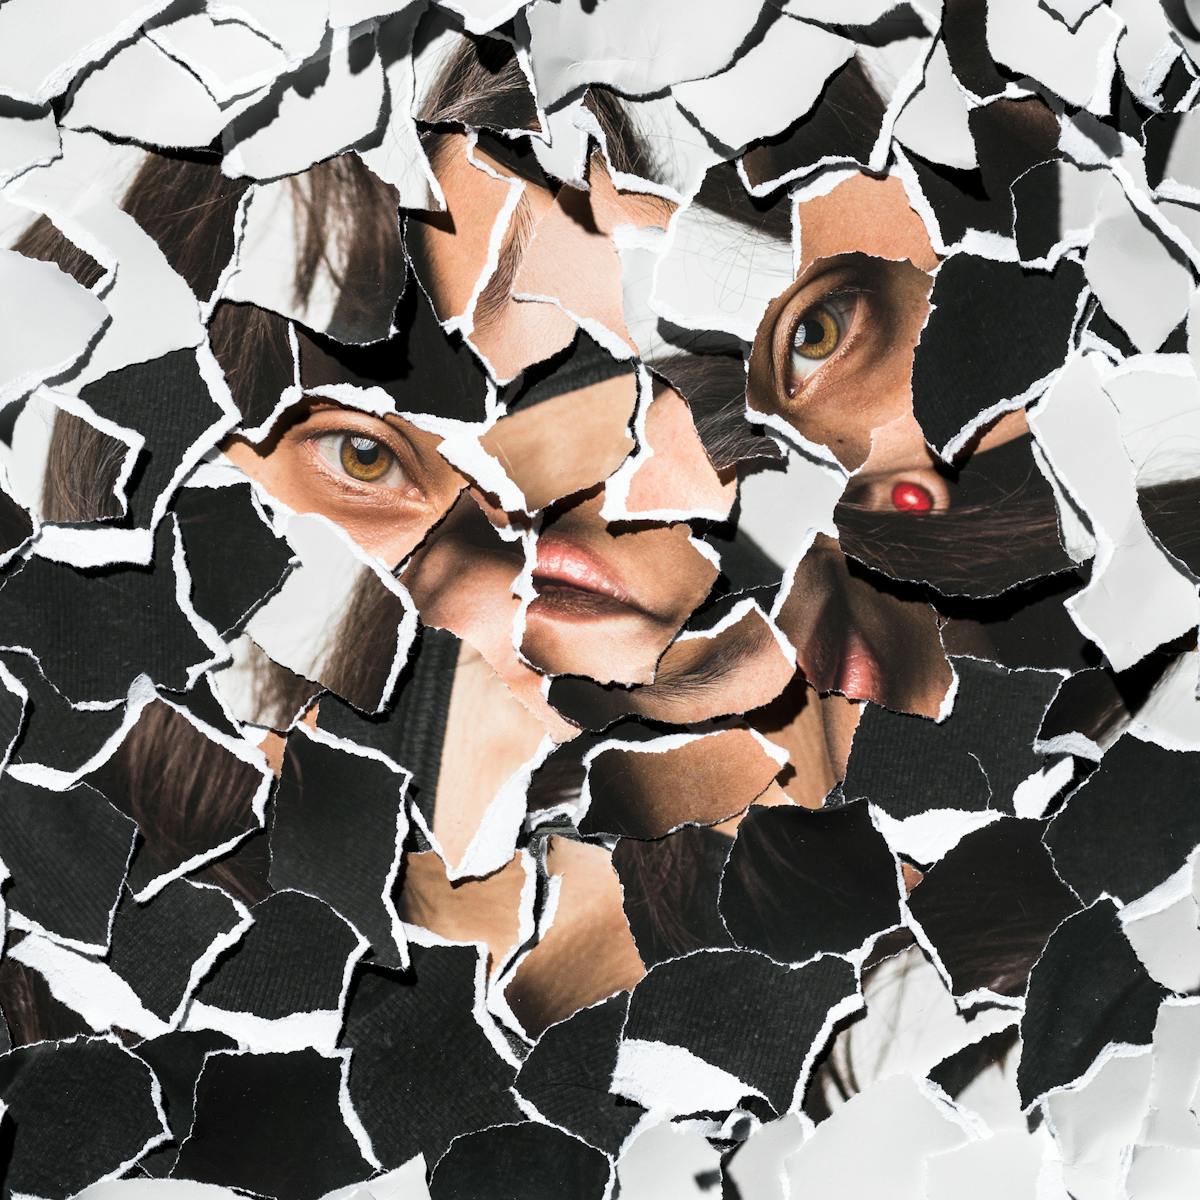 Photograph of a collage of torn up pieces of a photographic print all piled up randomly on top of each other. There are fragments of eyes, lips, hair and dark and light tones.